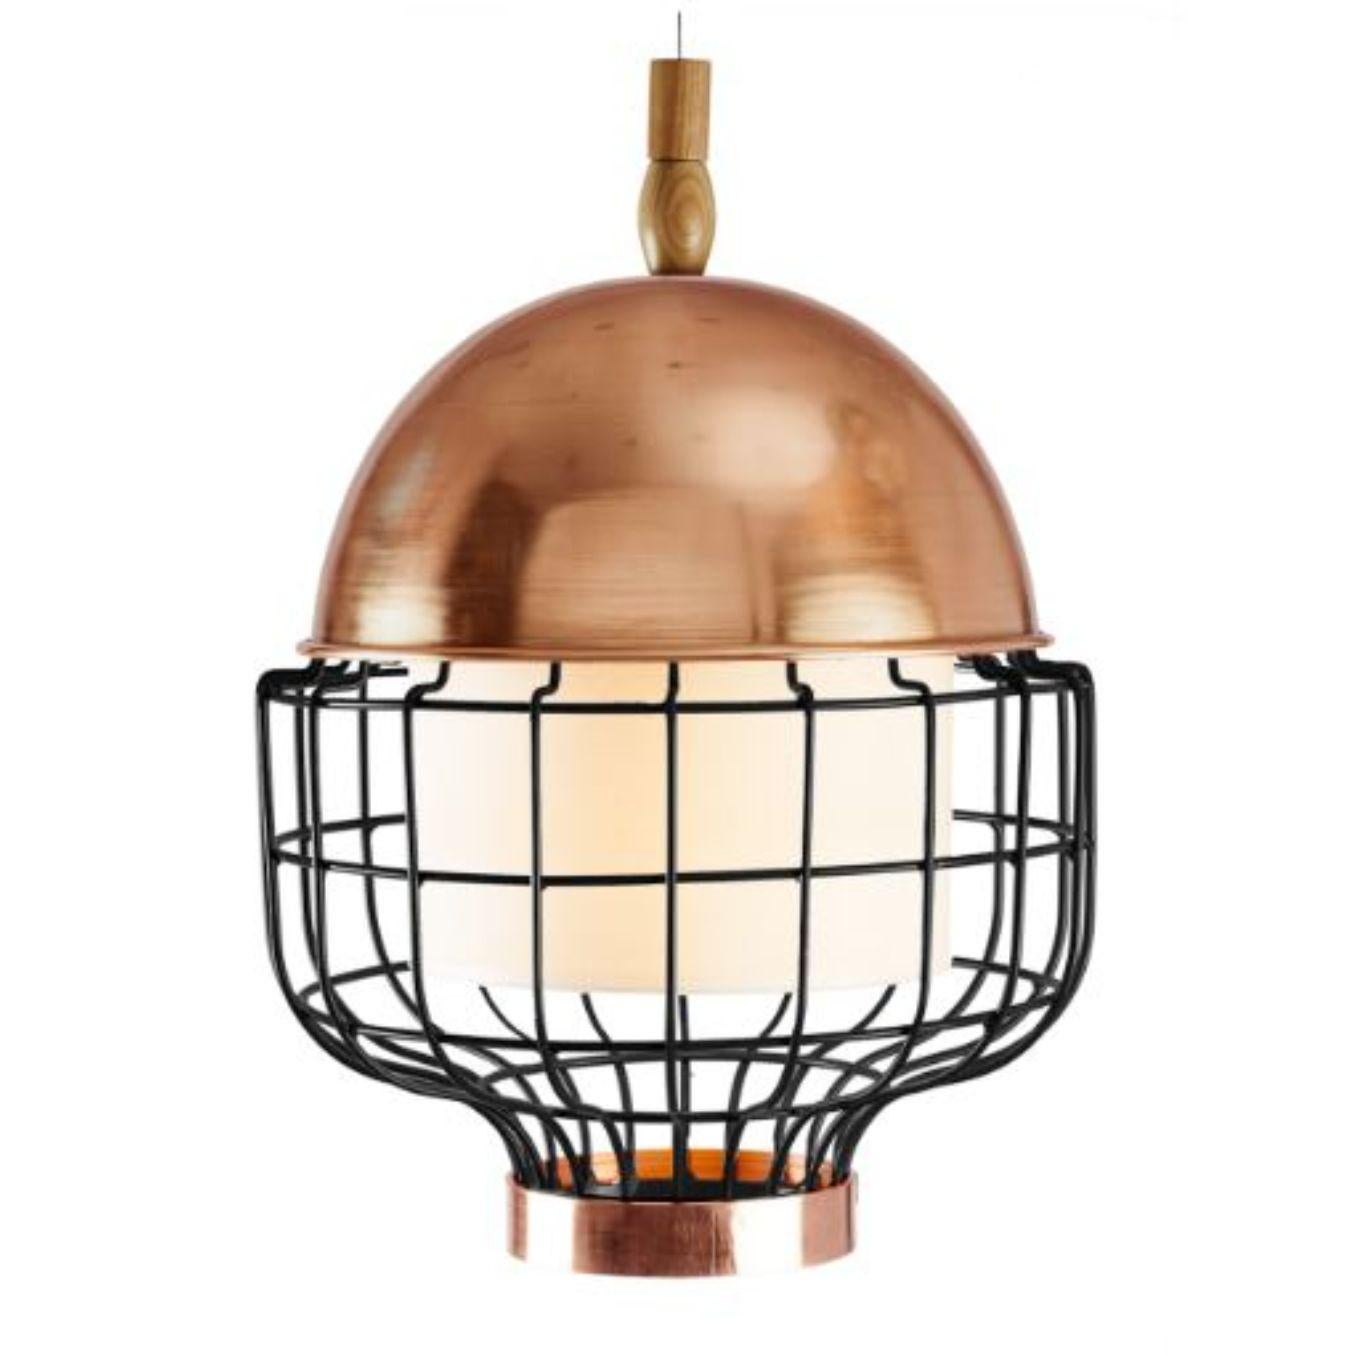 Copper black Magnolia III suspension lamp with copper ring by Dooq.
Dimensions: W 31 x D 31 x H 42 cm.
Materials: lacquered metal, polished or brushed metal, copper.
abat-jour: cotton
Also available in different colours and